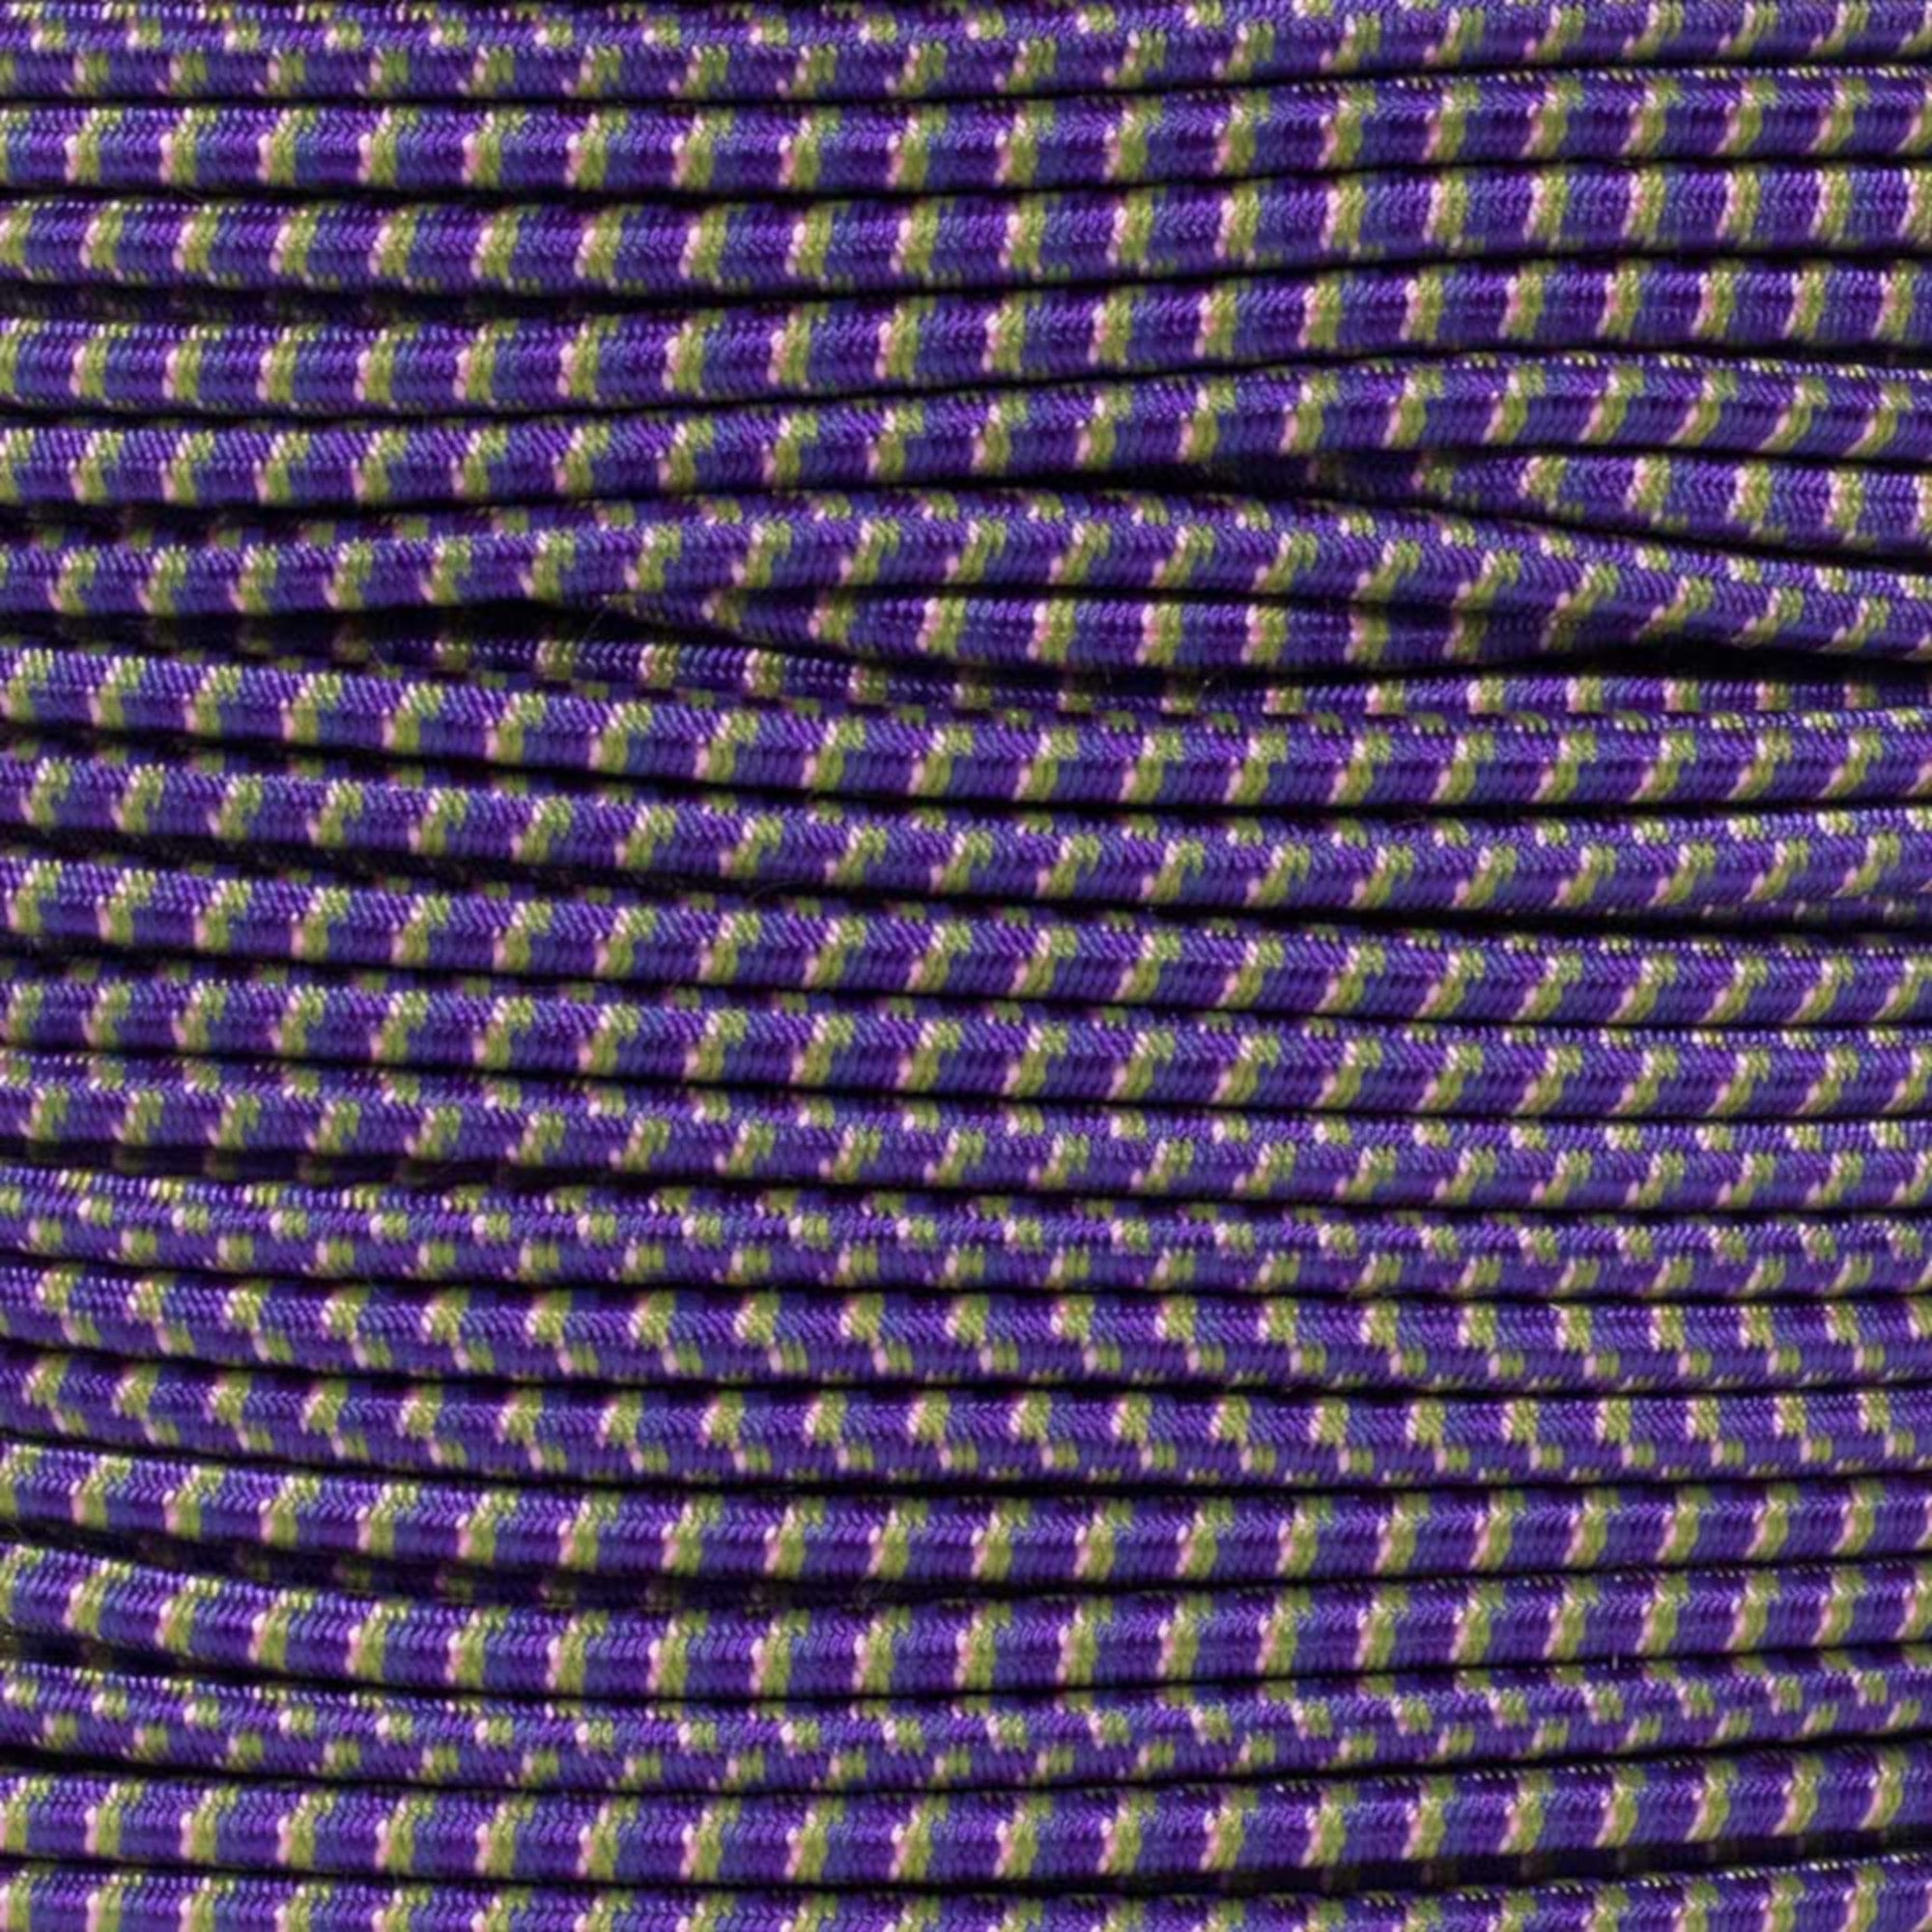 Paracord Planet 3/16 inch Elastic Bungee Nylon Shock Cord Crafting Stretch  String - Various Colors - 10 25 50 & 100 Foot Lengths Made in USA - Walmart. com